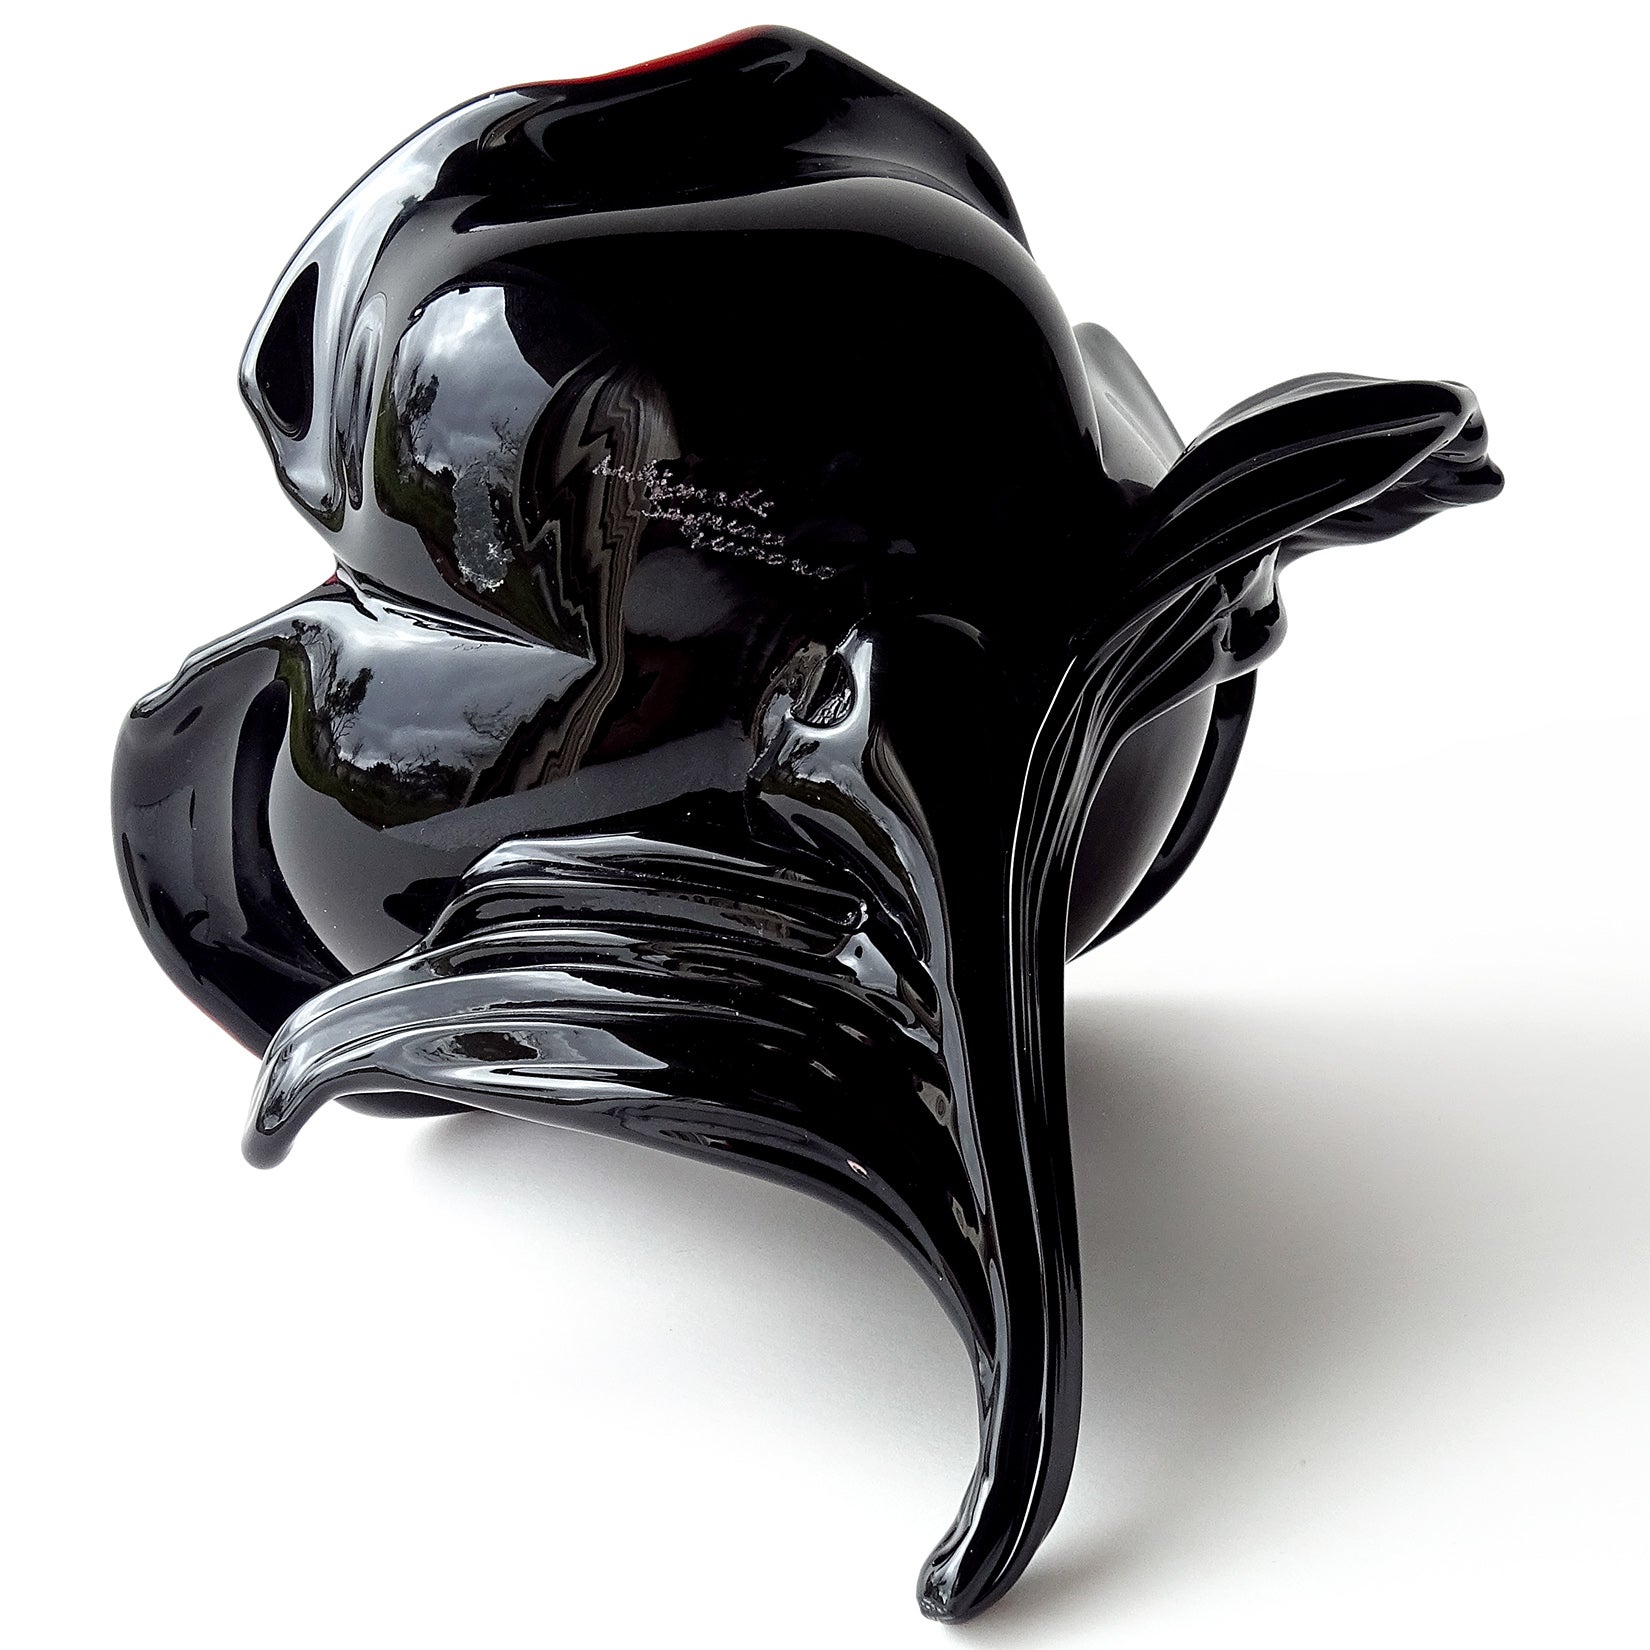 Rare, and beautiful, vintage Murano hand blown black and red bands Italian art glass flower sculpture. Documented, and signed by designer Archimede Seguso, circa 1970-1980. The signature underneath reads 